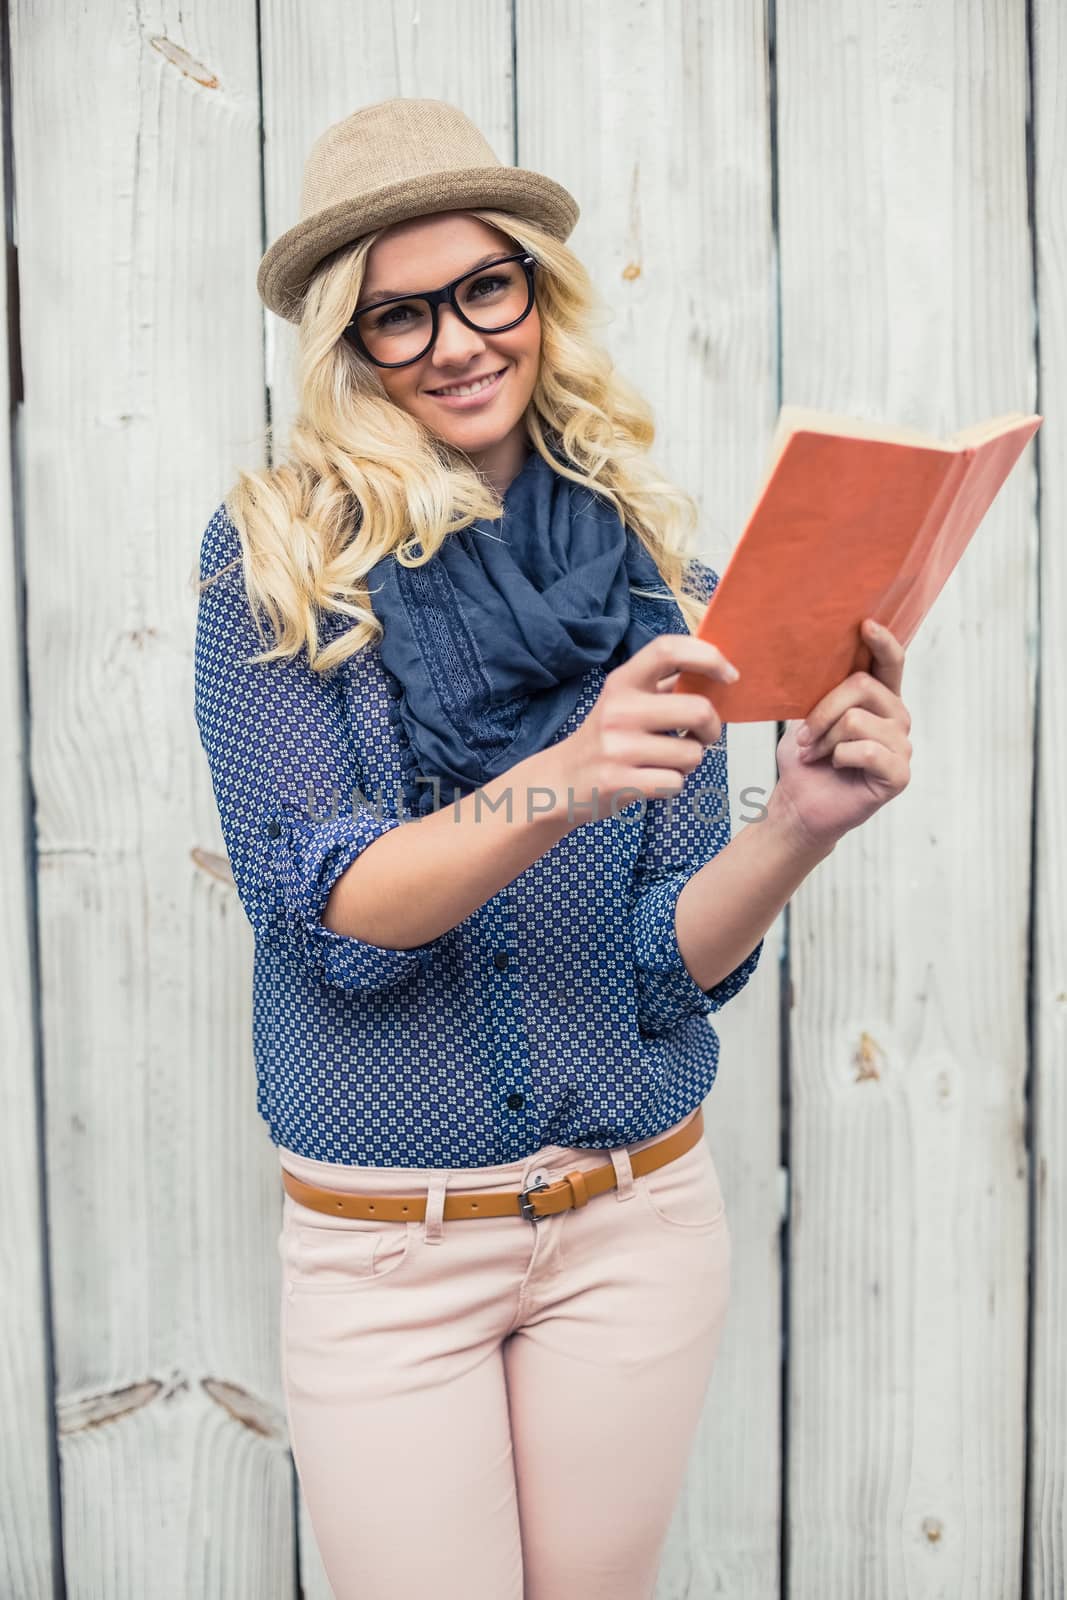 Smiling fashionable blonde holding book outdoors by Wavebreakmedia